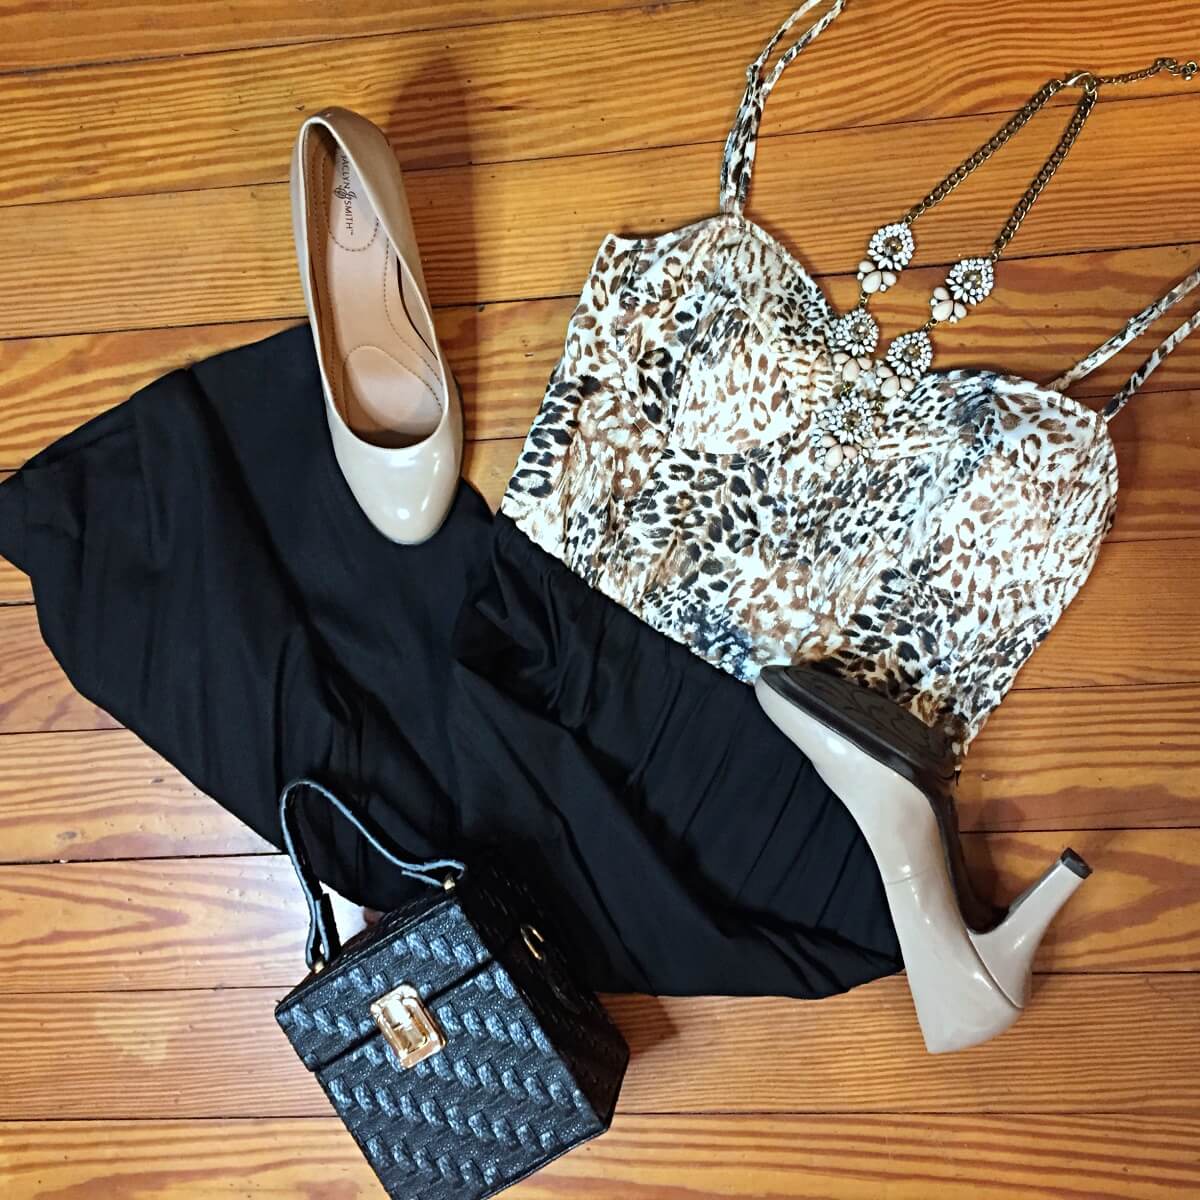 halter leopard top with black bottom dress outfit